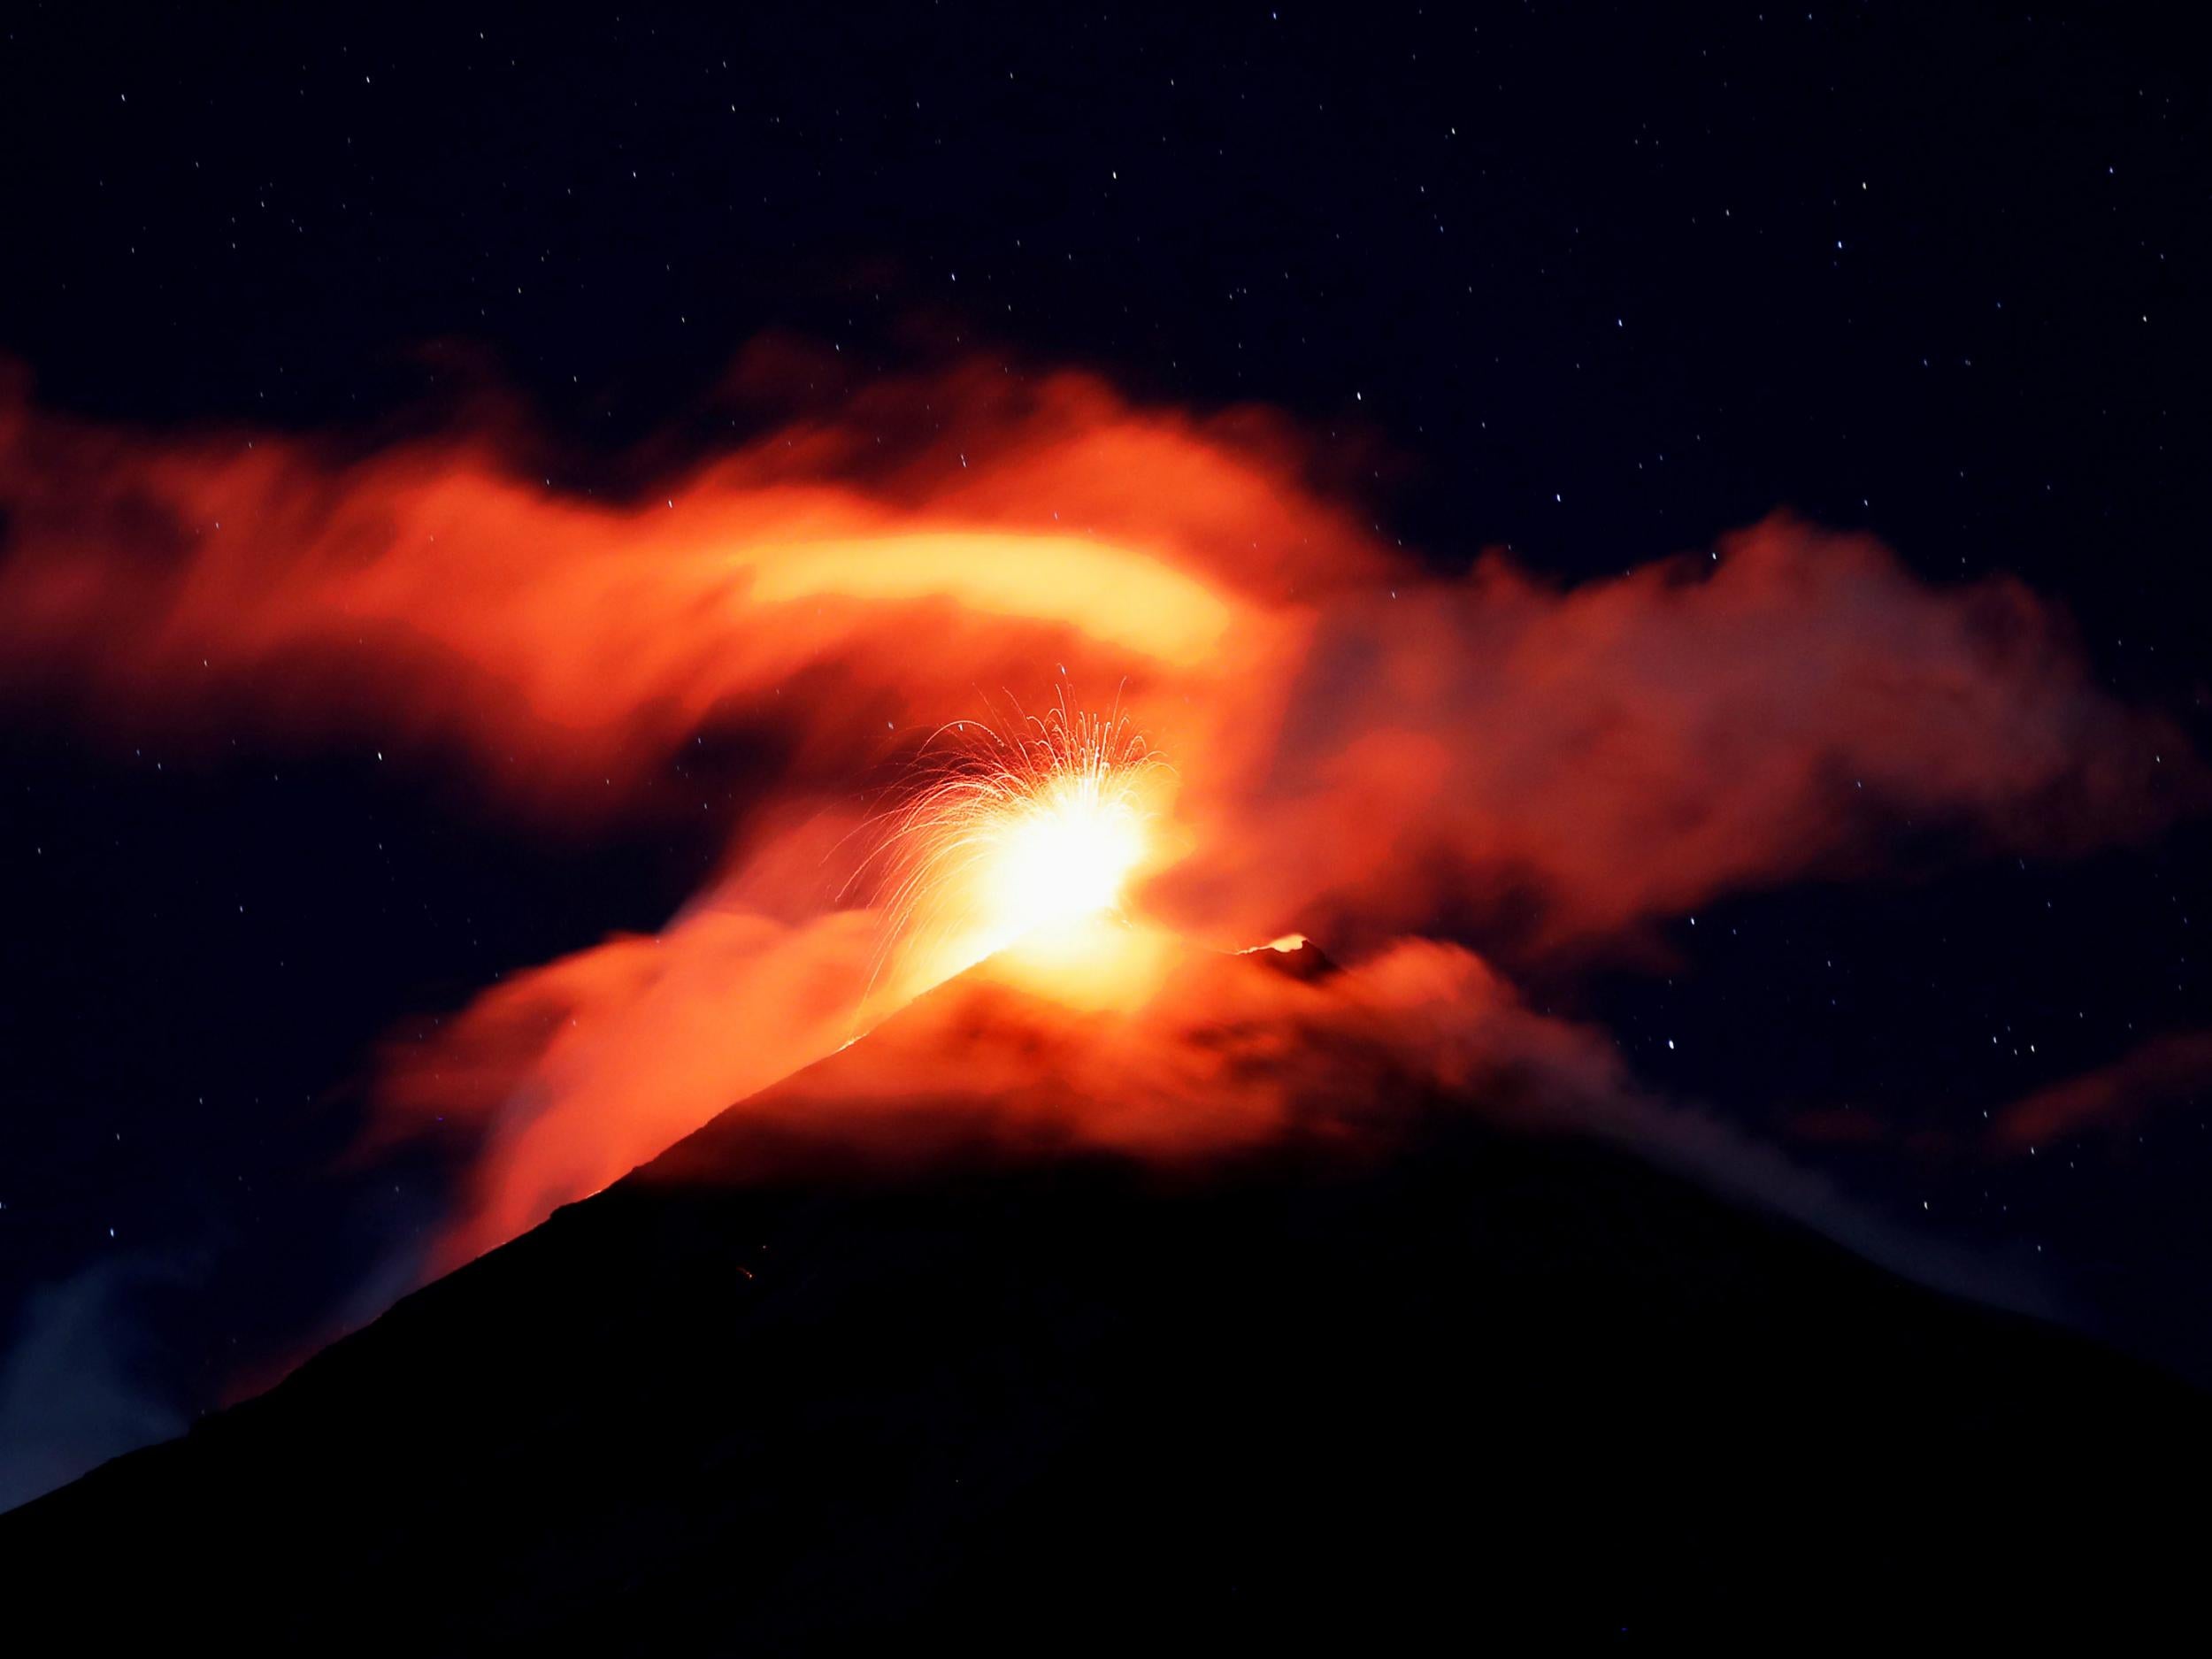 Volcano of Fire mount spews hot ashes and lava, as seen from Alotenango, Guatemala, on 18 November 2018